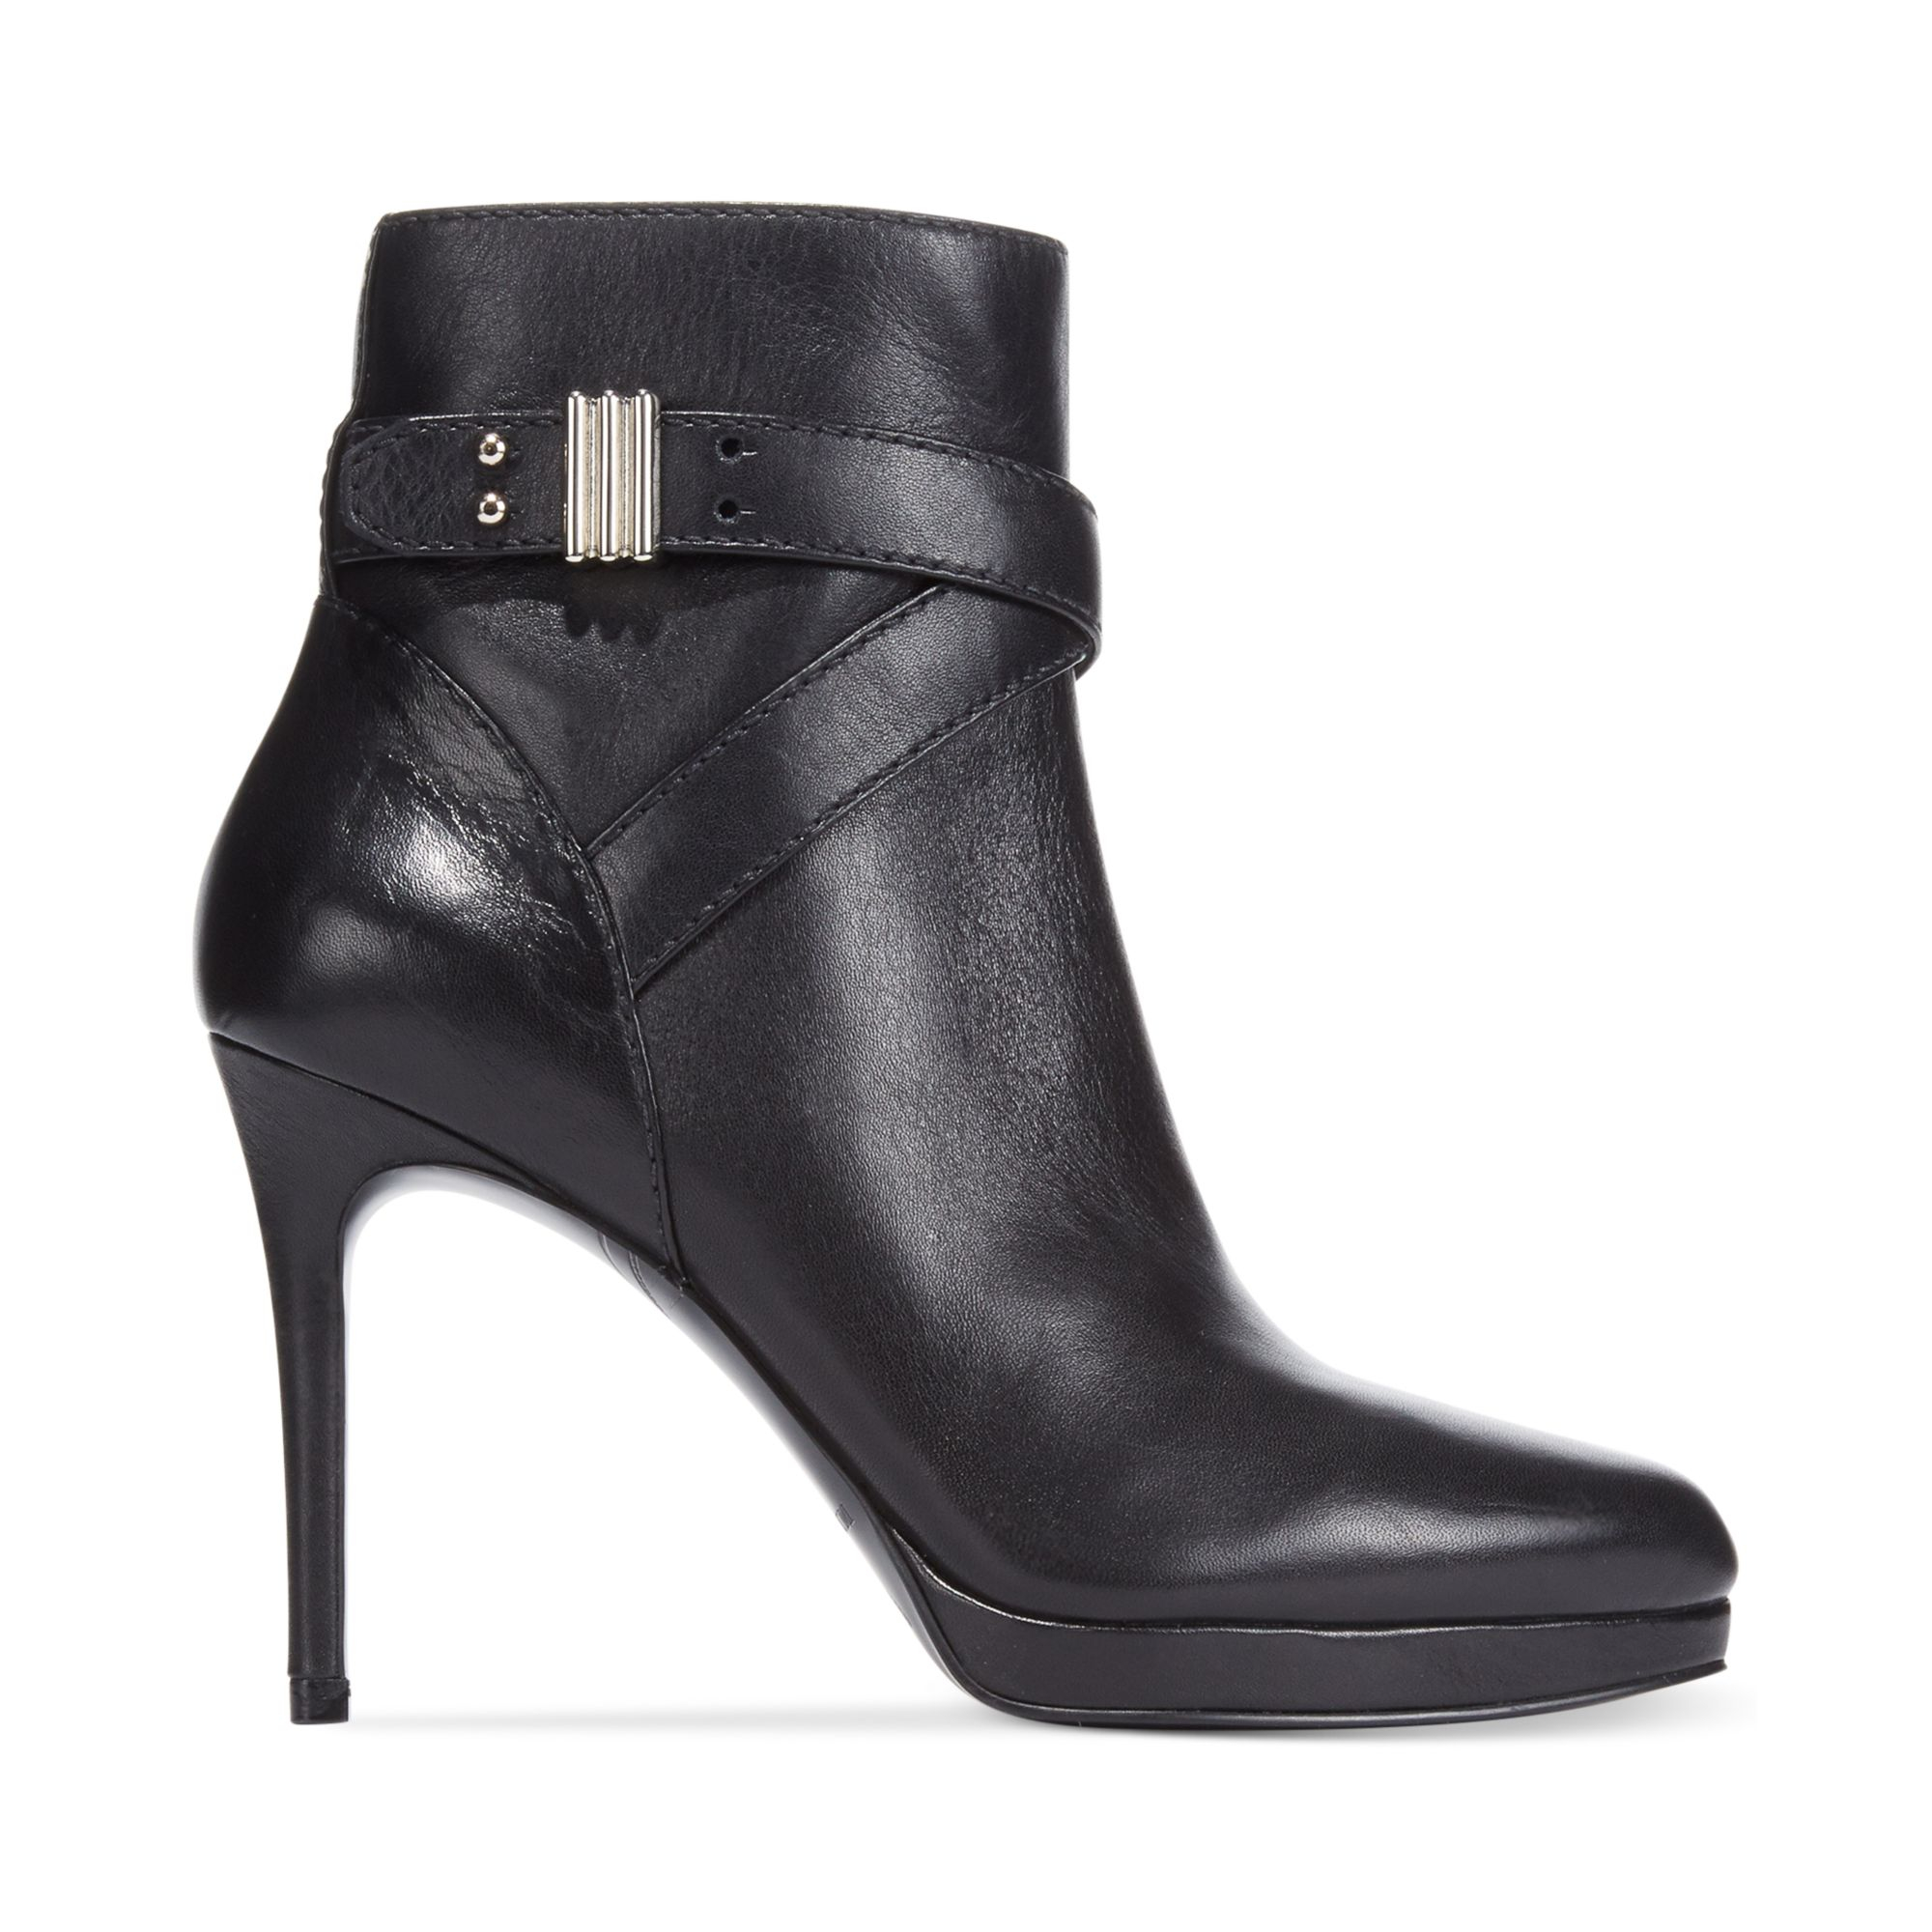 Enzo Angiolini Dalyons Platform Booties in Black | Lyst